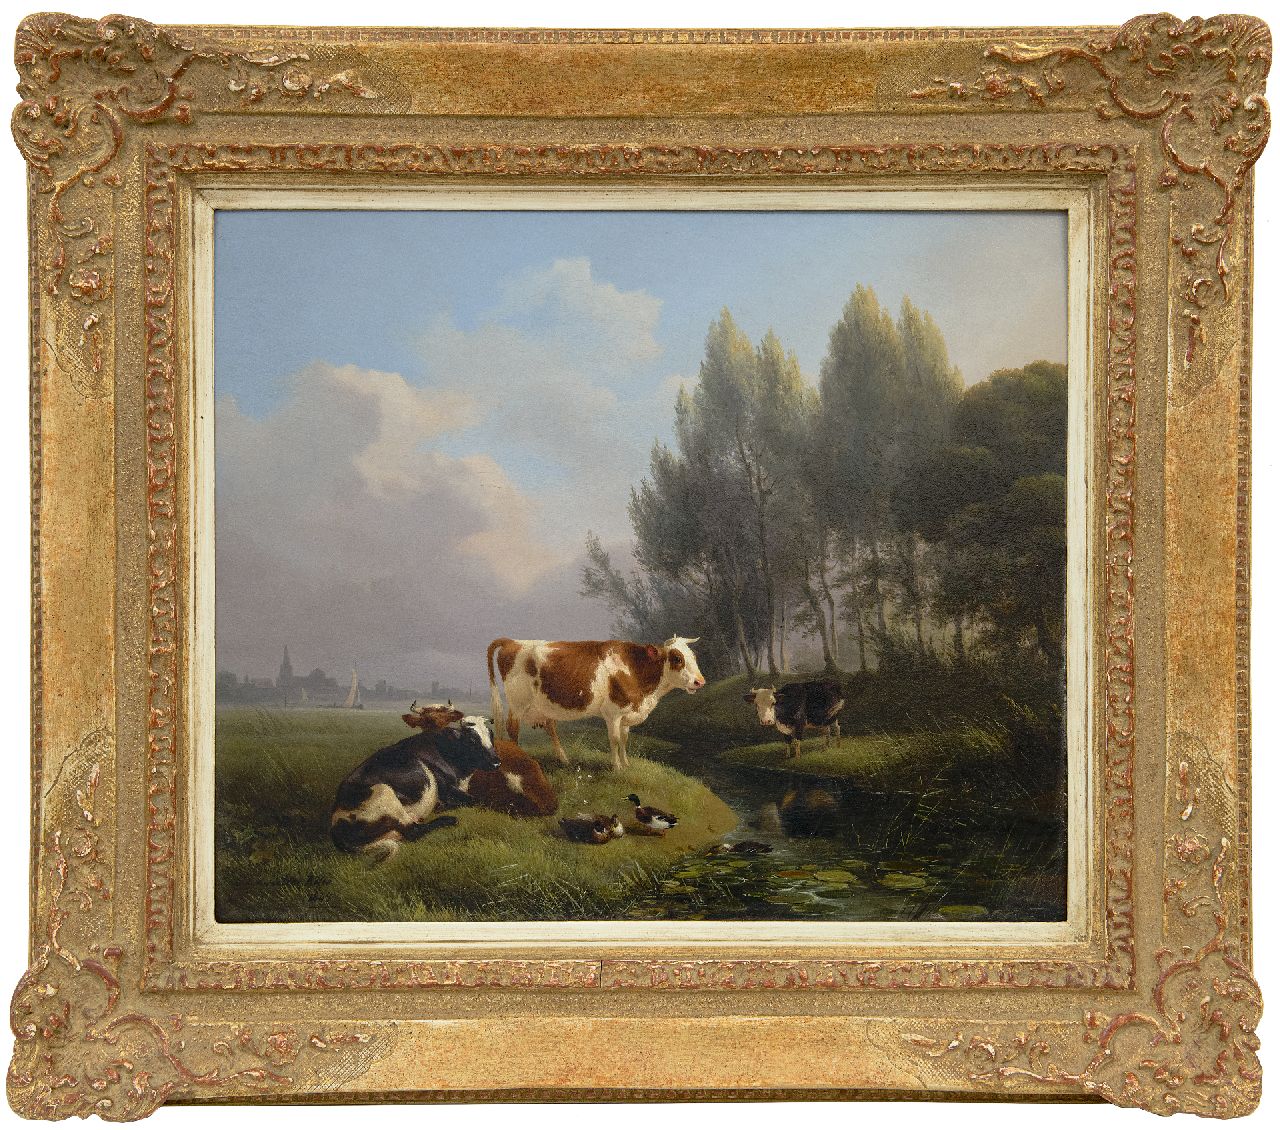 Ronner-Knip H.  | Henriette Ronner-Knip, Cows in a meadow, Den Bosch in the distance, oil on panel 33.0 x 39.2 cm, signed l.l. and dated 1845